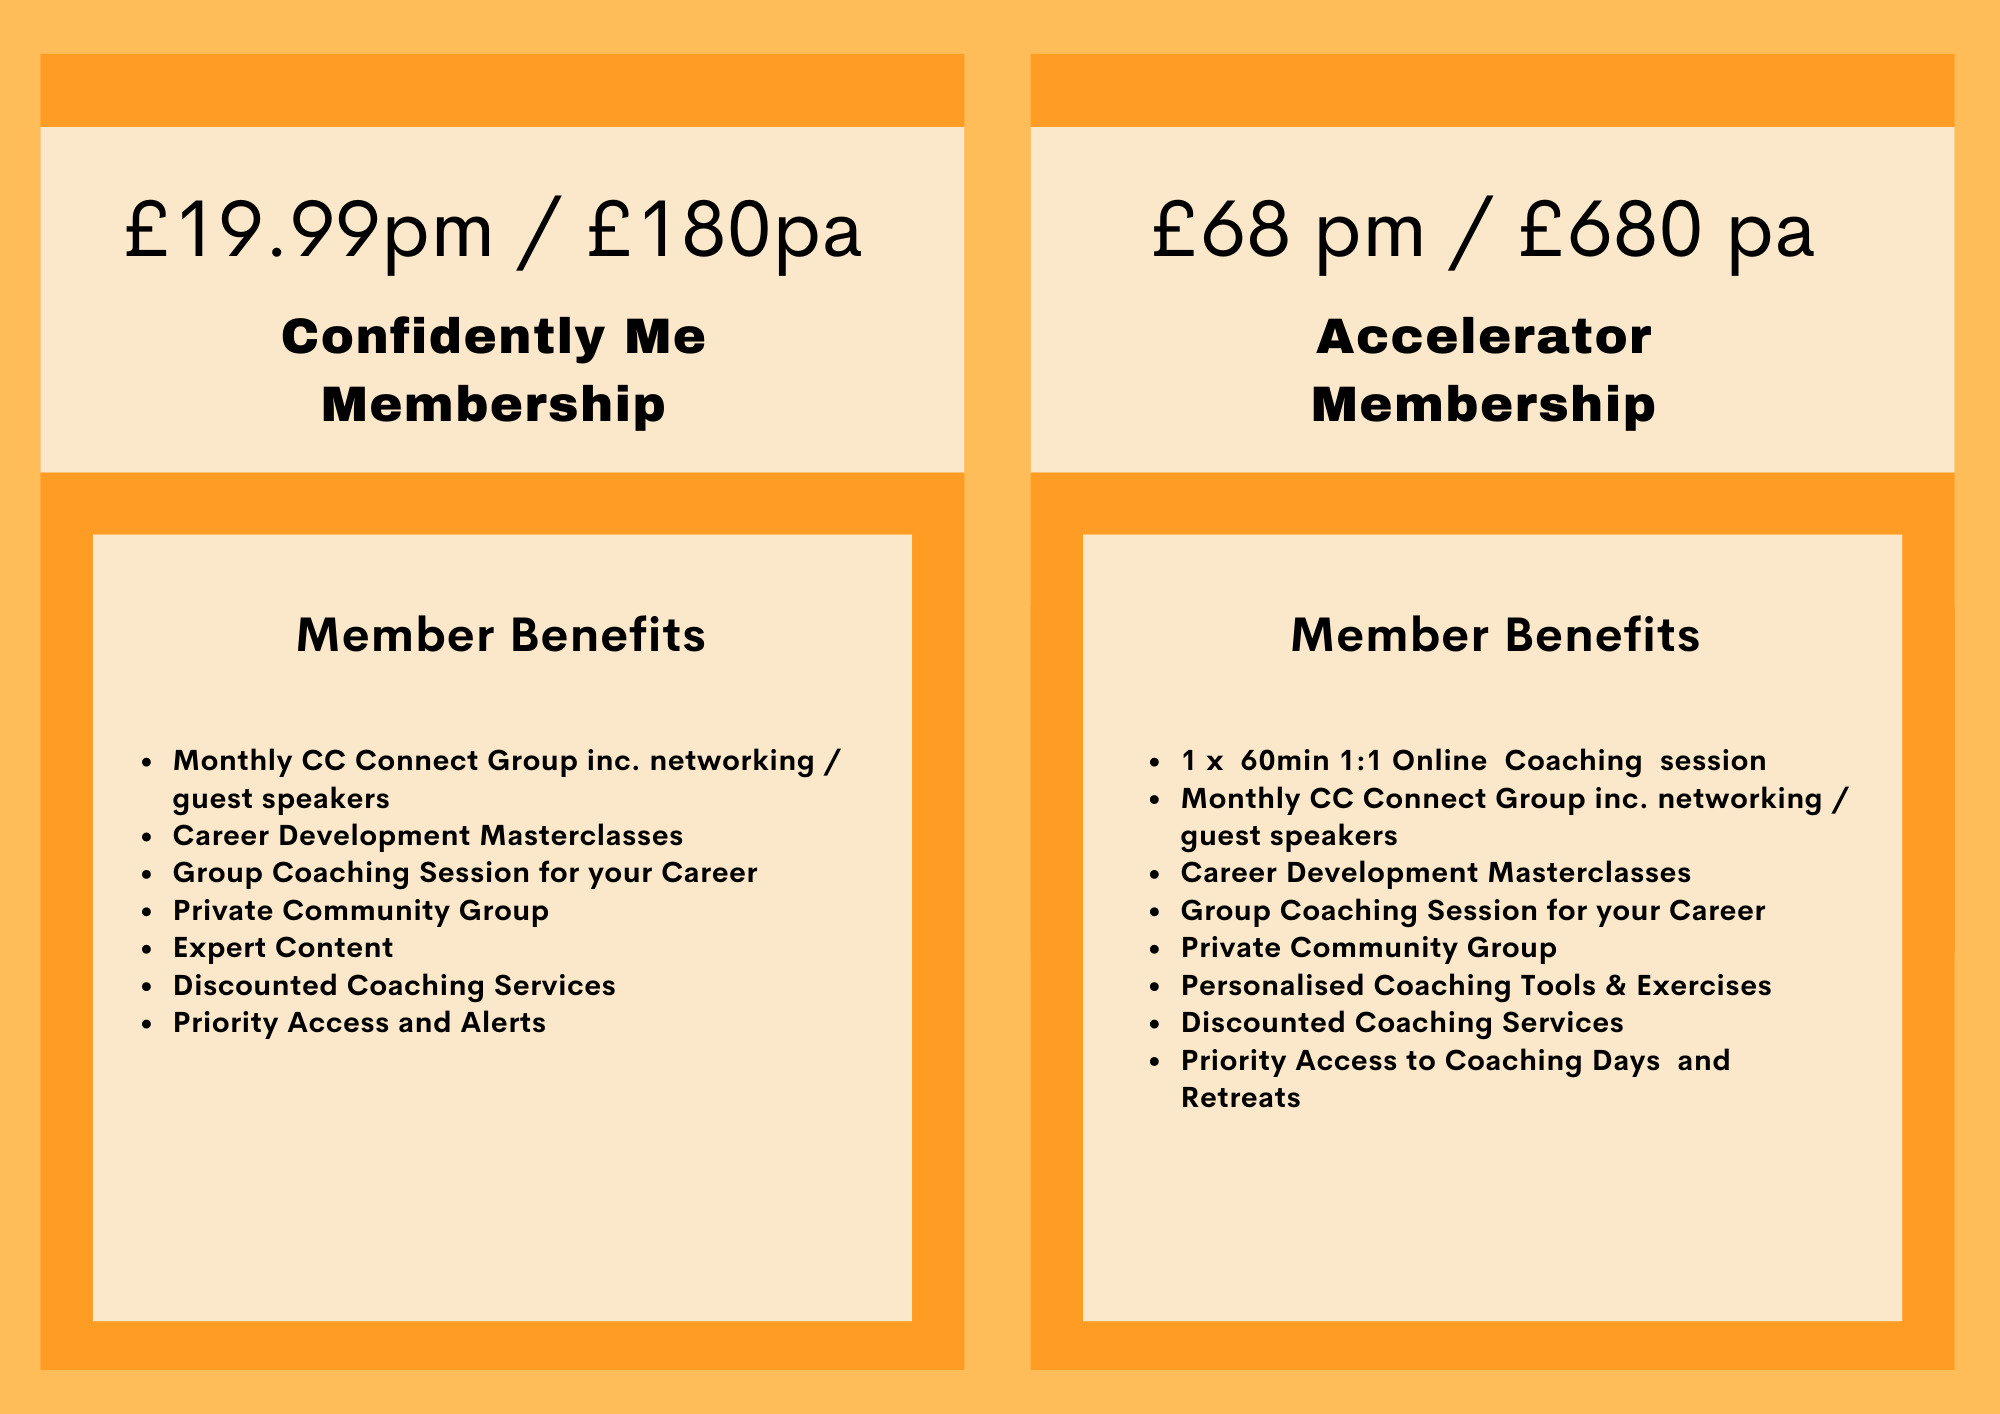 Image with prices and details of membership options